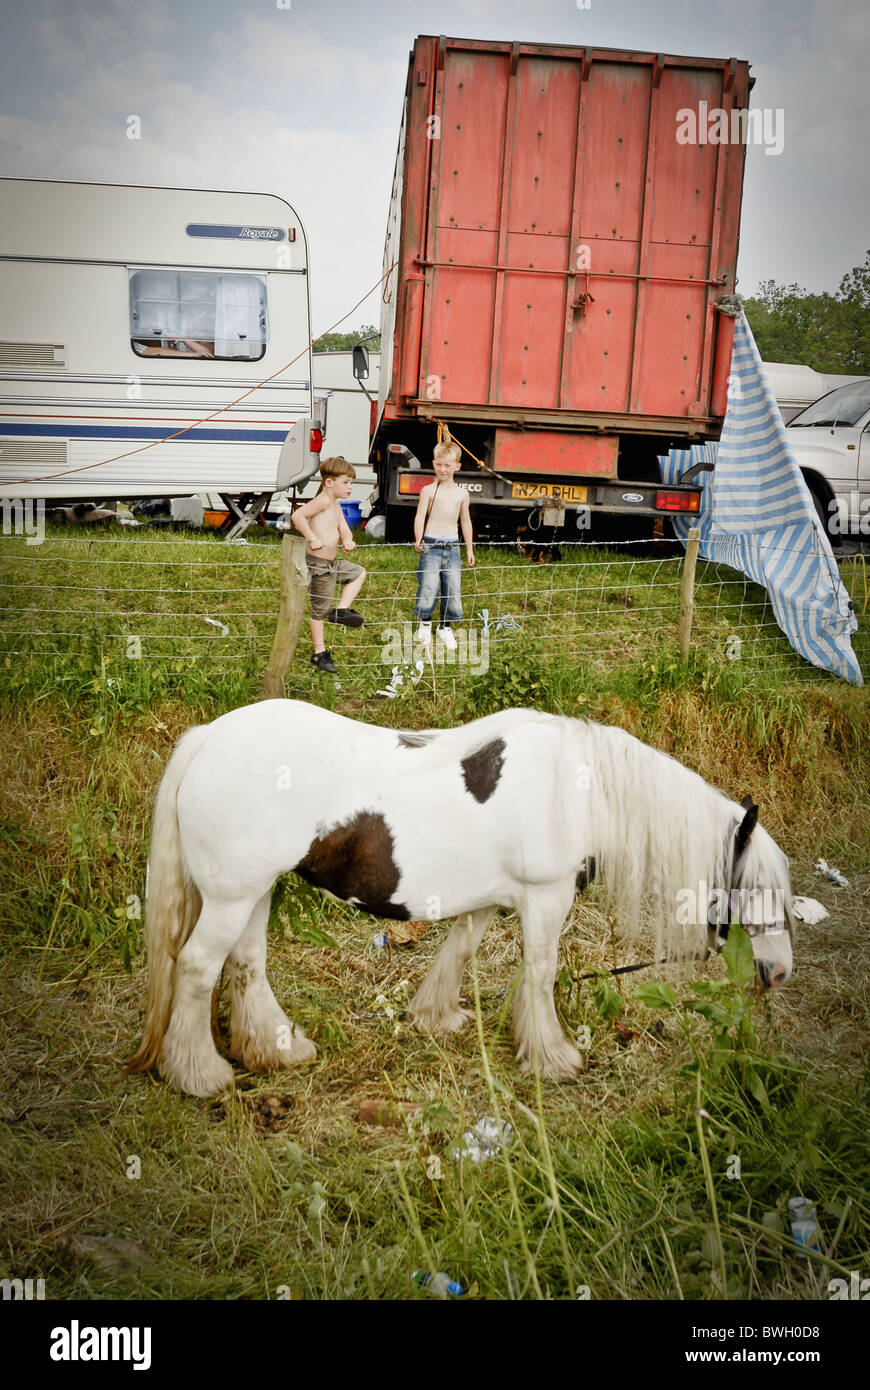 Tinkers Caravan High Resolution Stock Photography and Images - Alamy